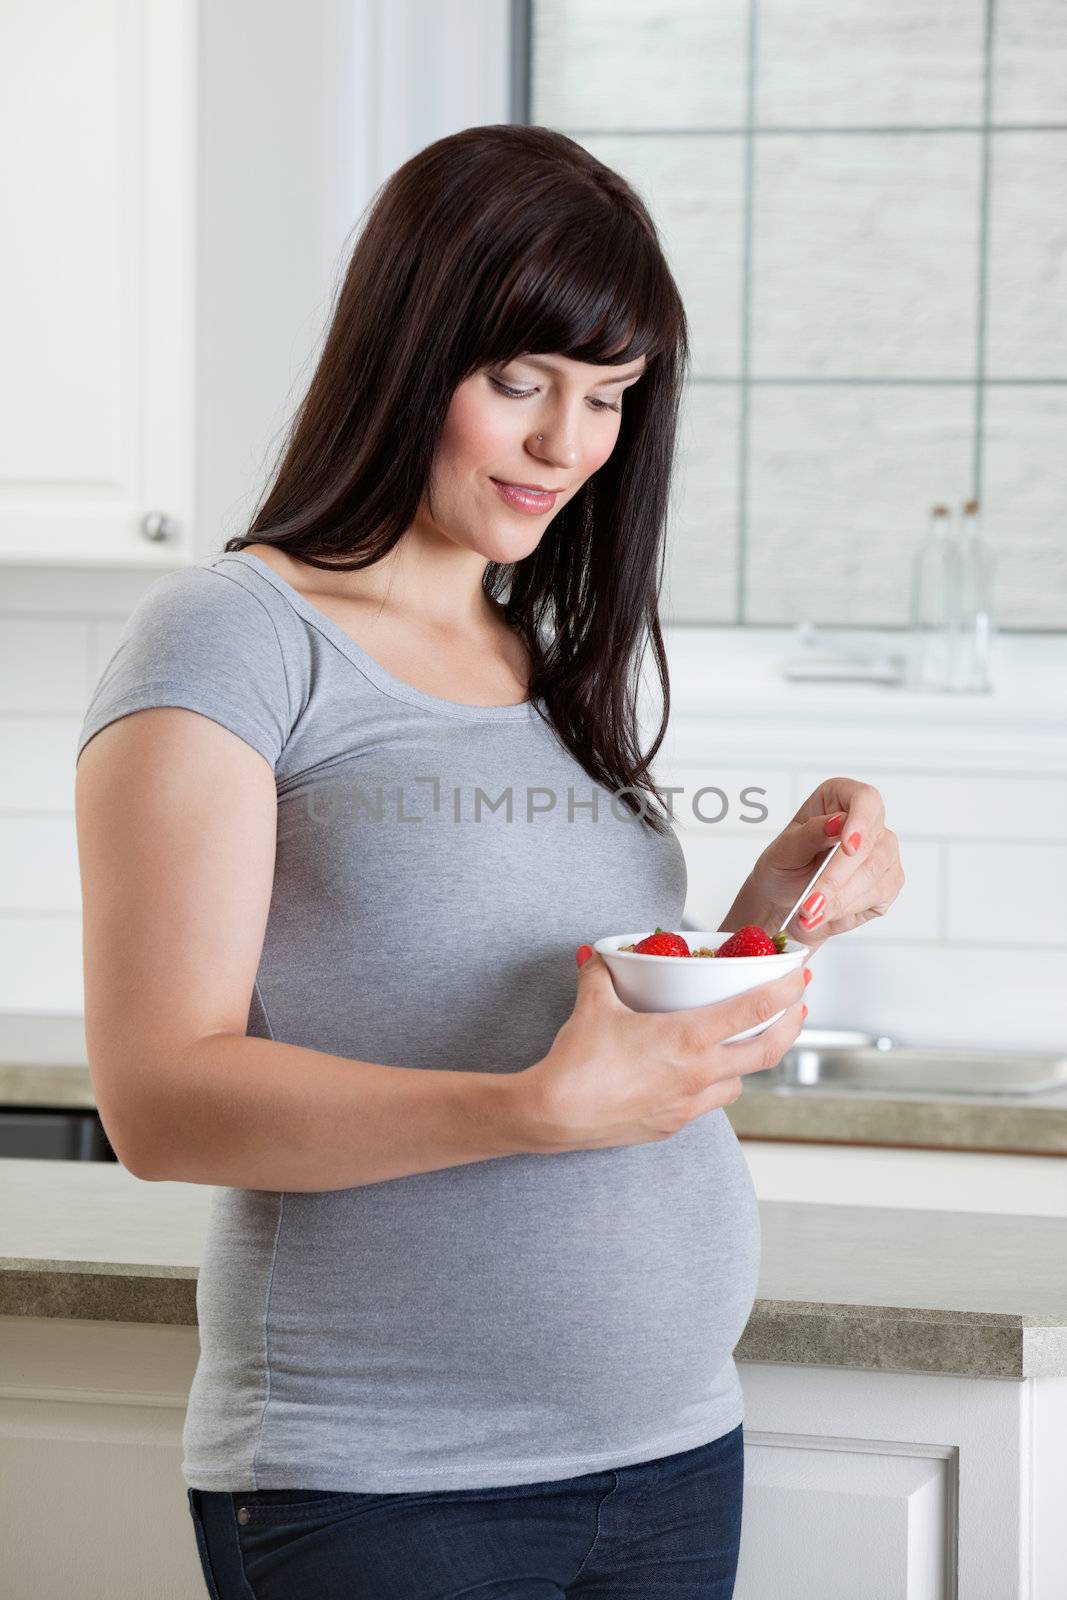 Pregnant woman eating healthy bowl of fruit in kitchen